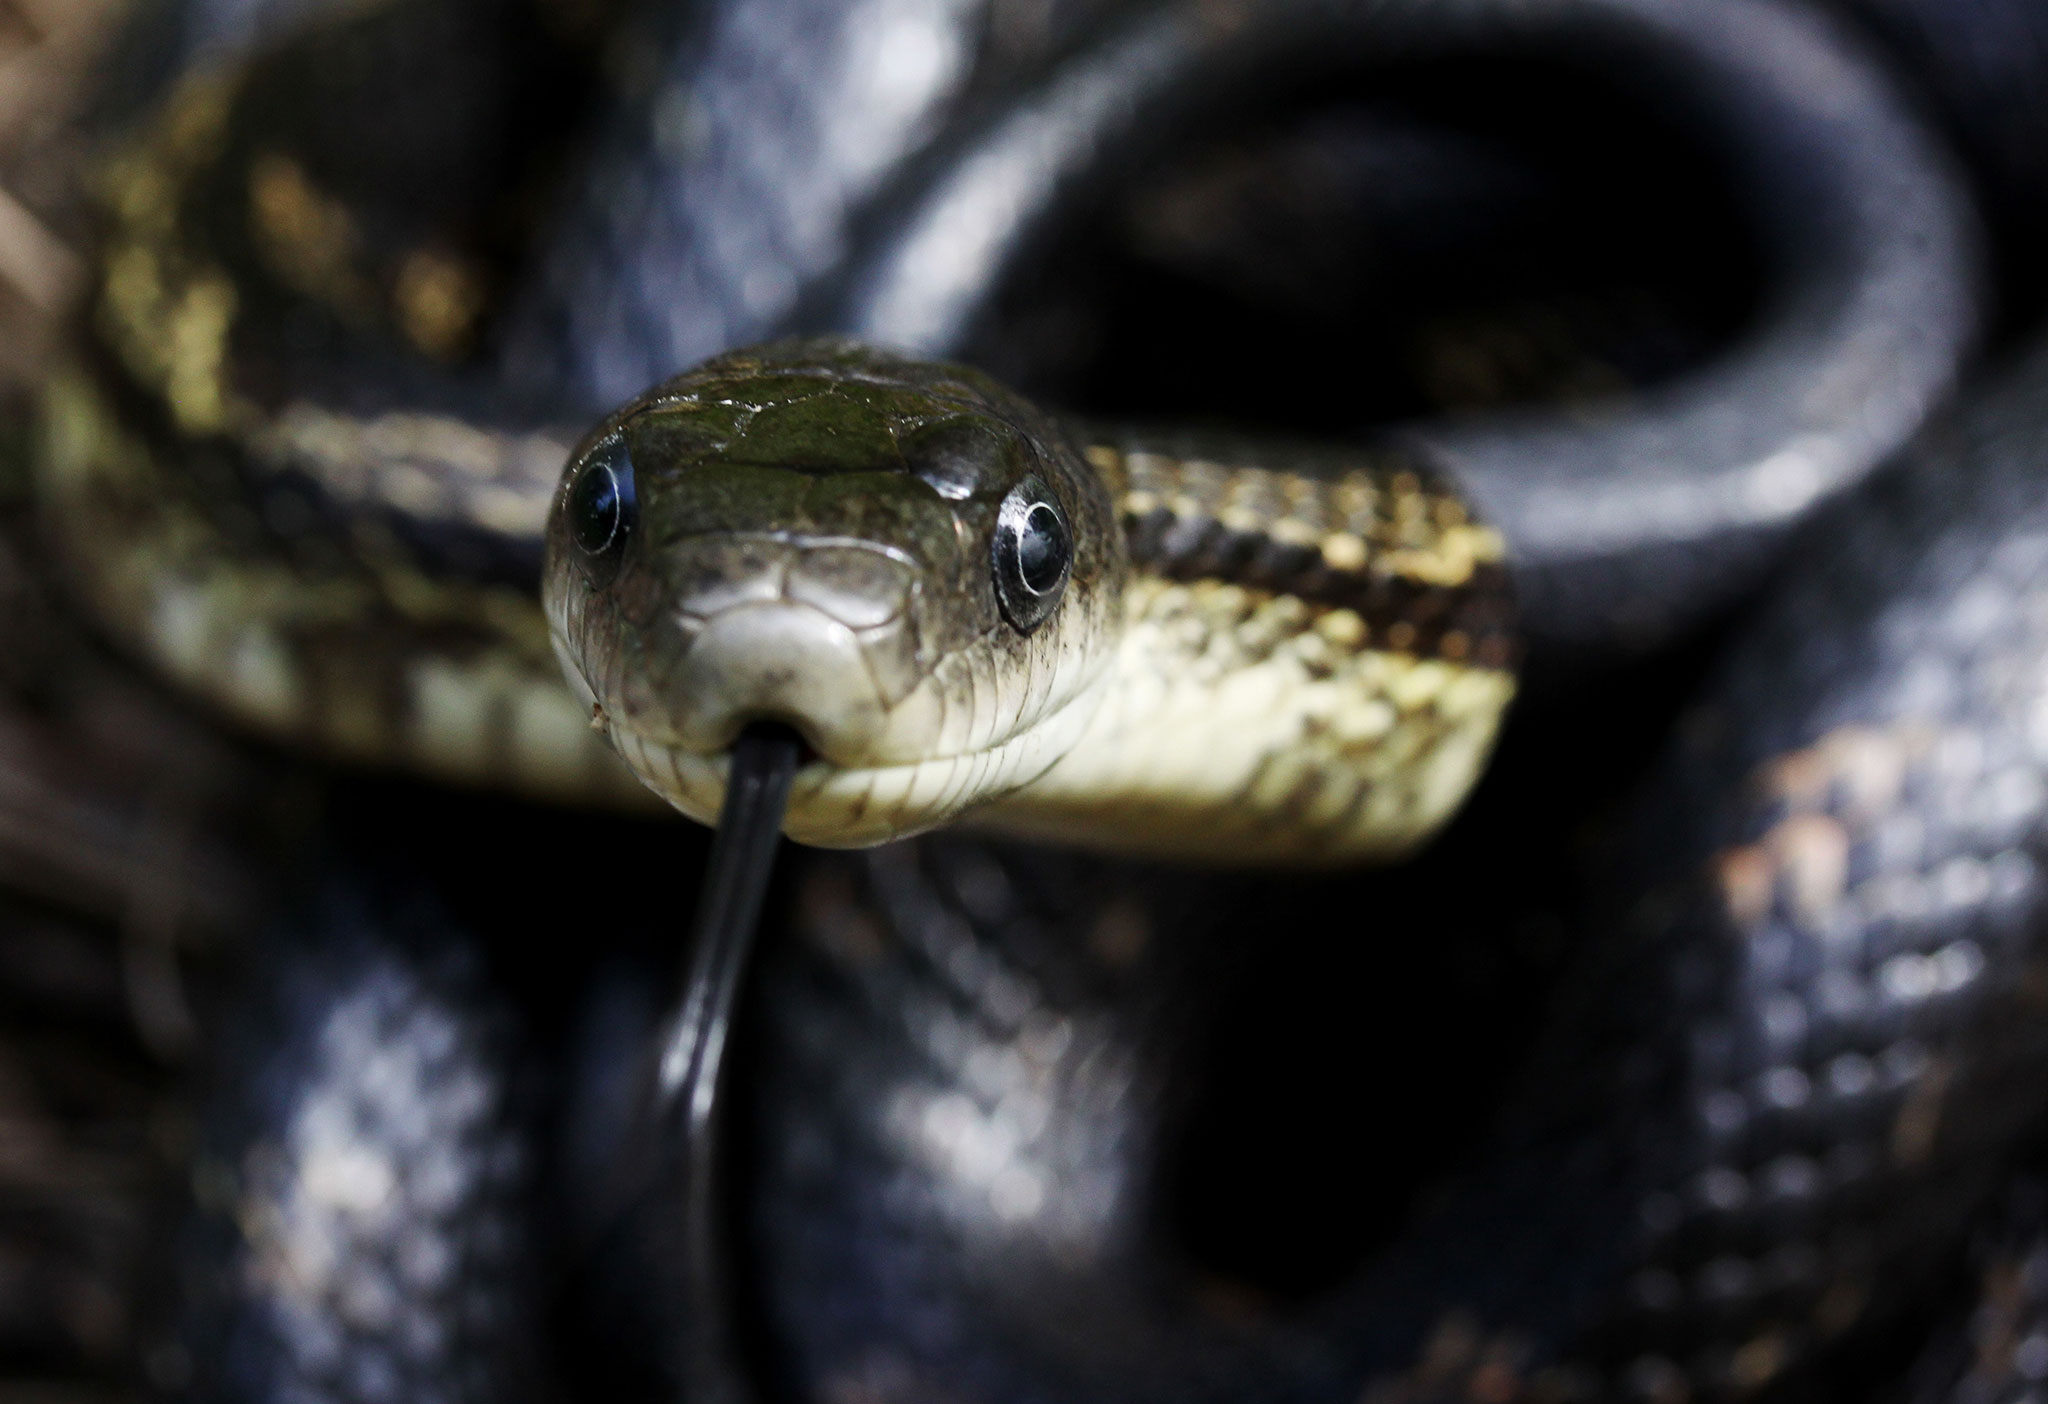 Snakes Infest House in Maryland—How Did It Happen?